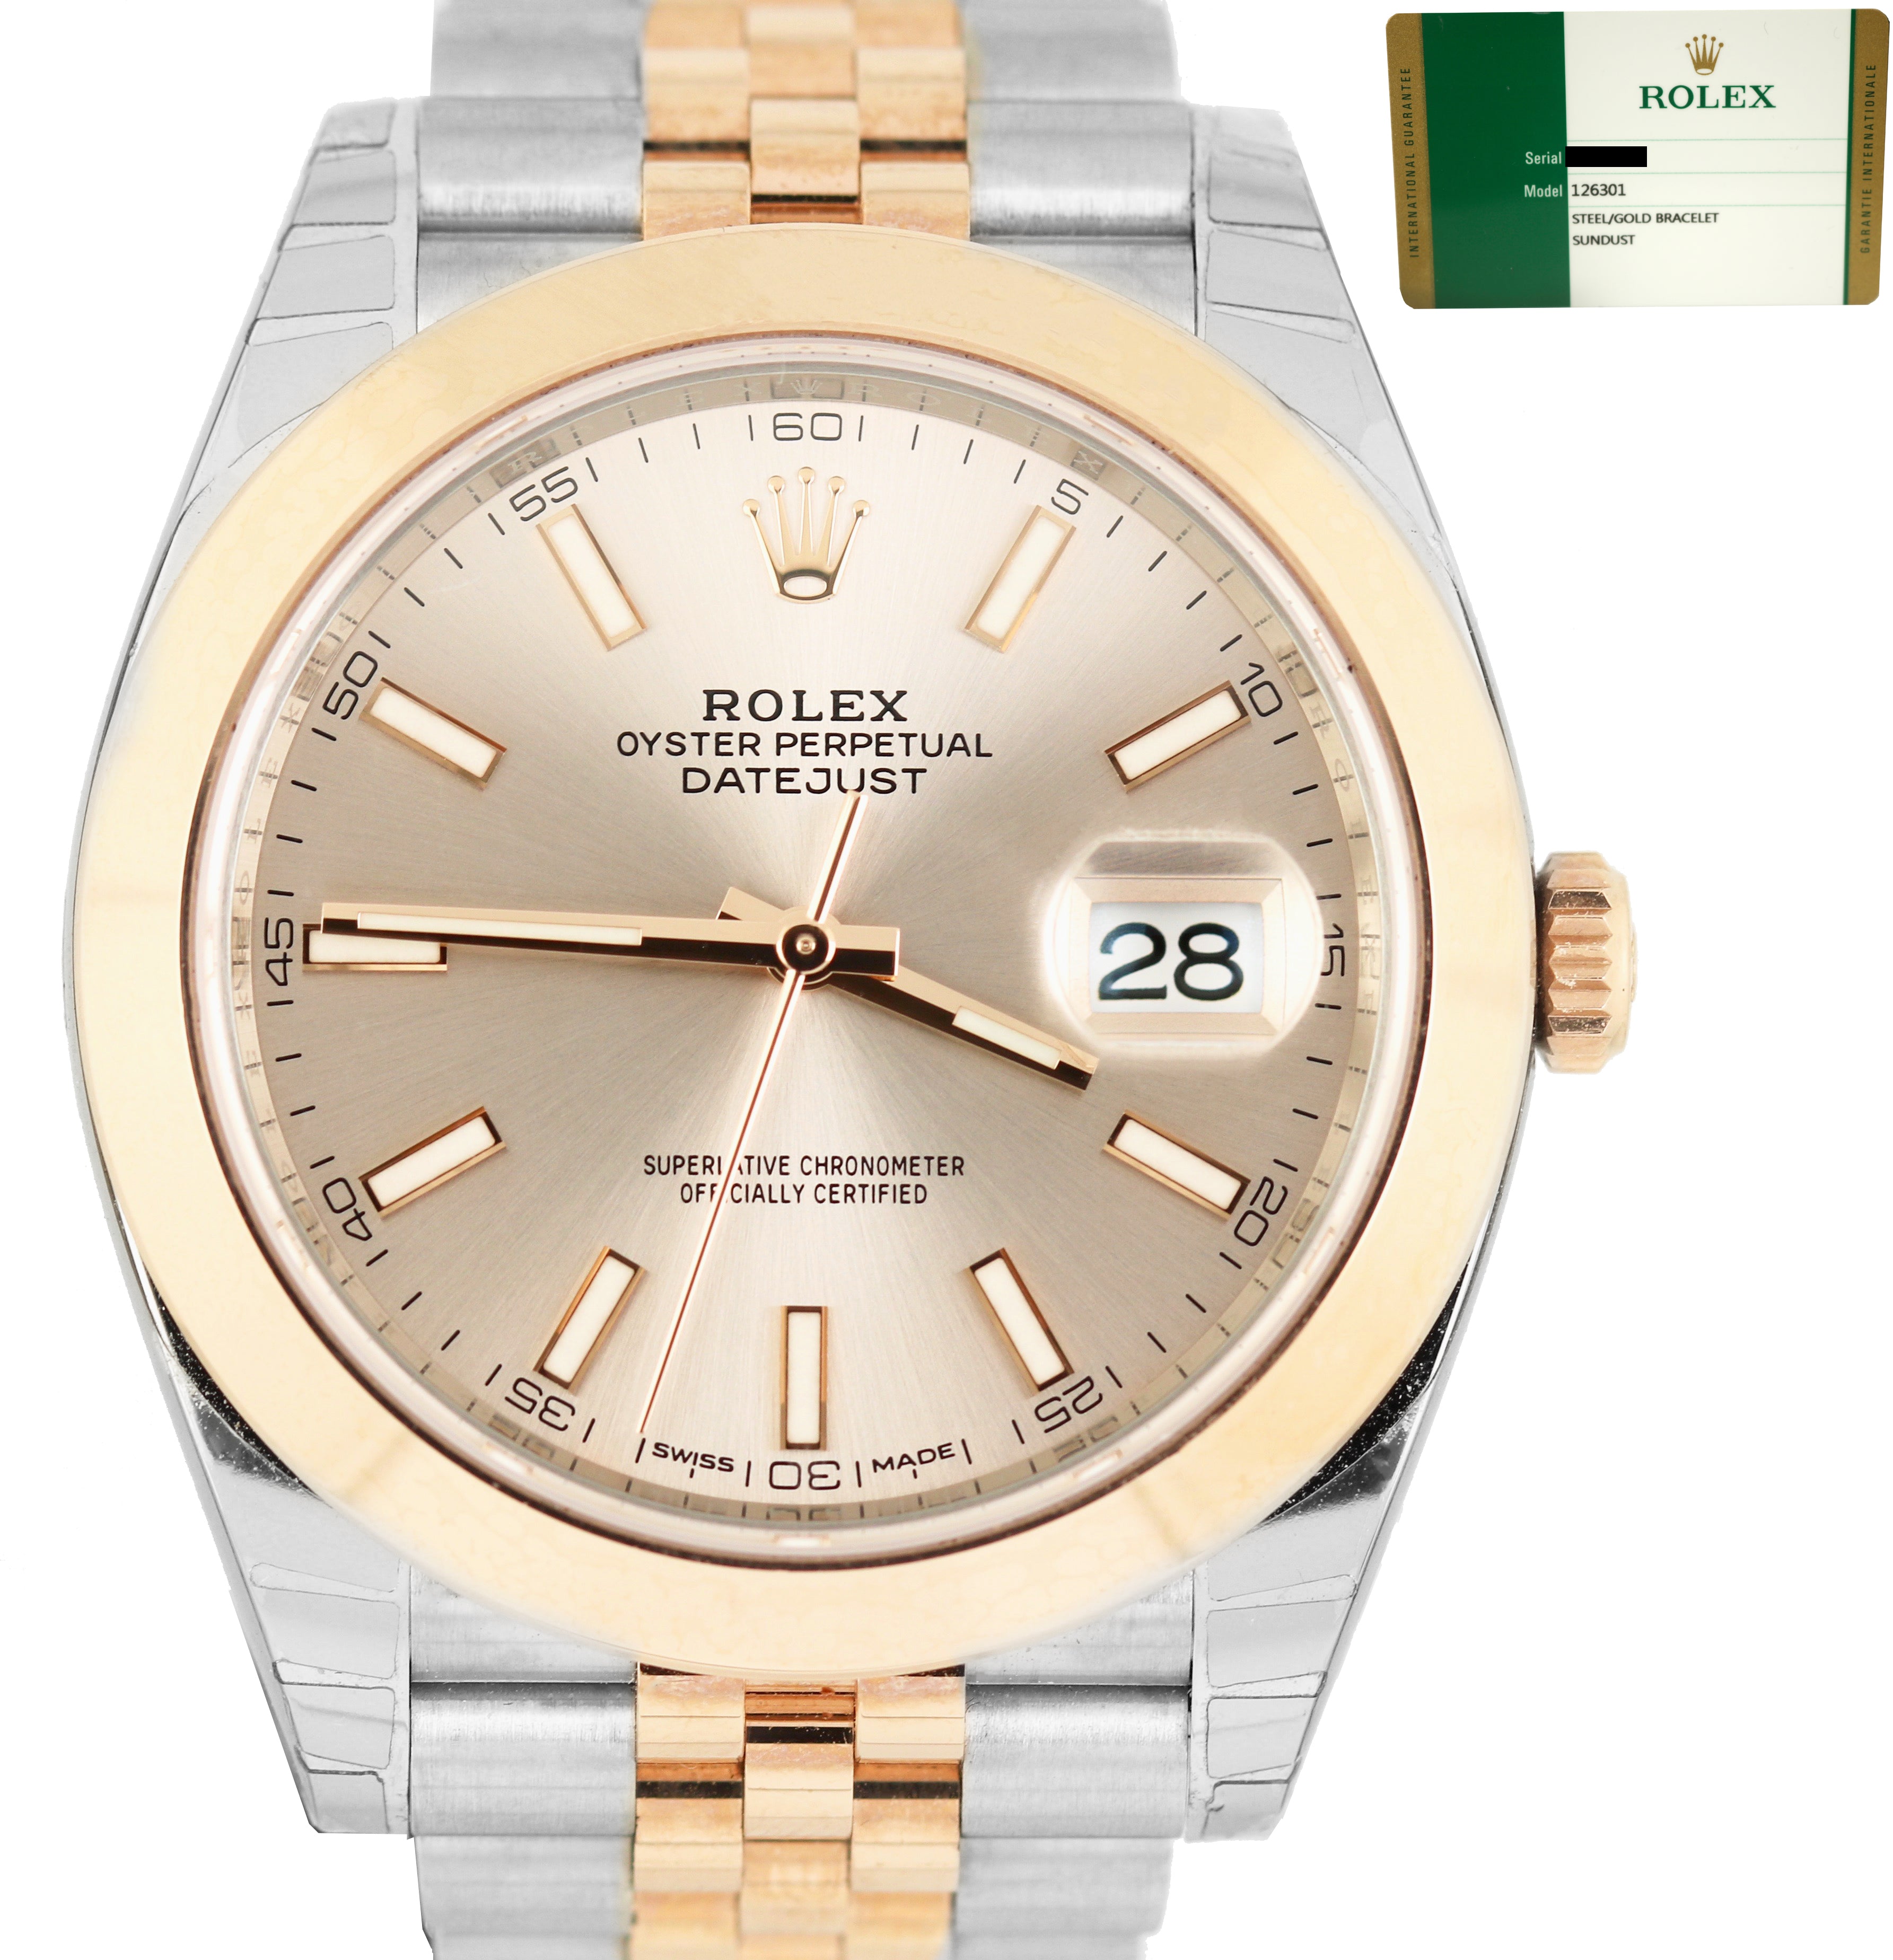 NOS 2017 Rolex DateJust 41 126301 Sundust Smooth Everose Gold Two-Tone Jubilee